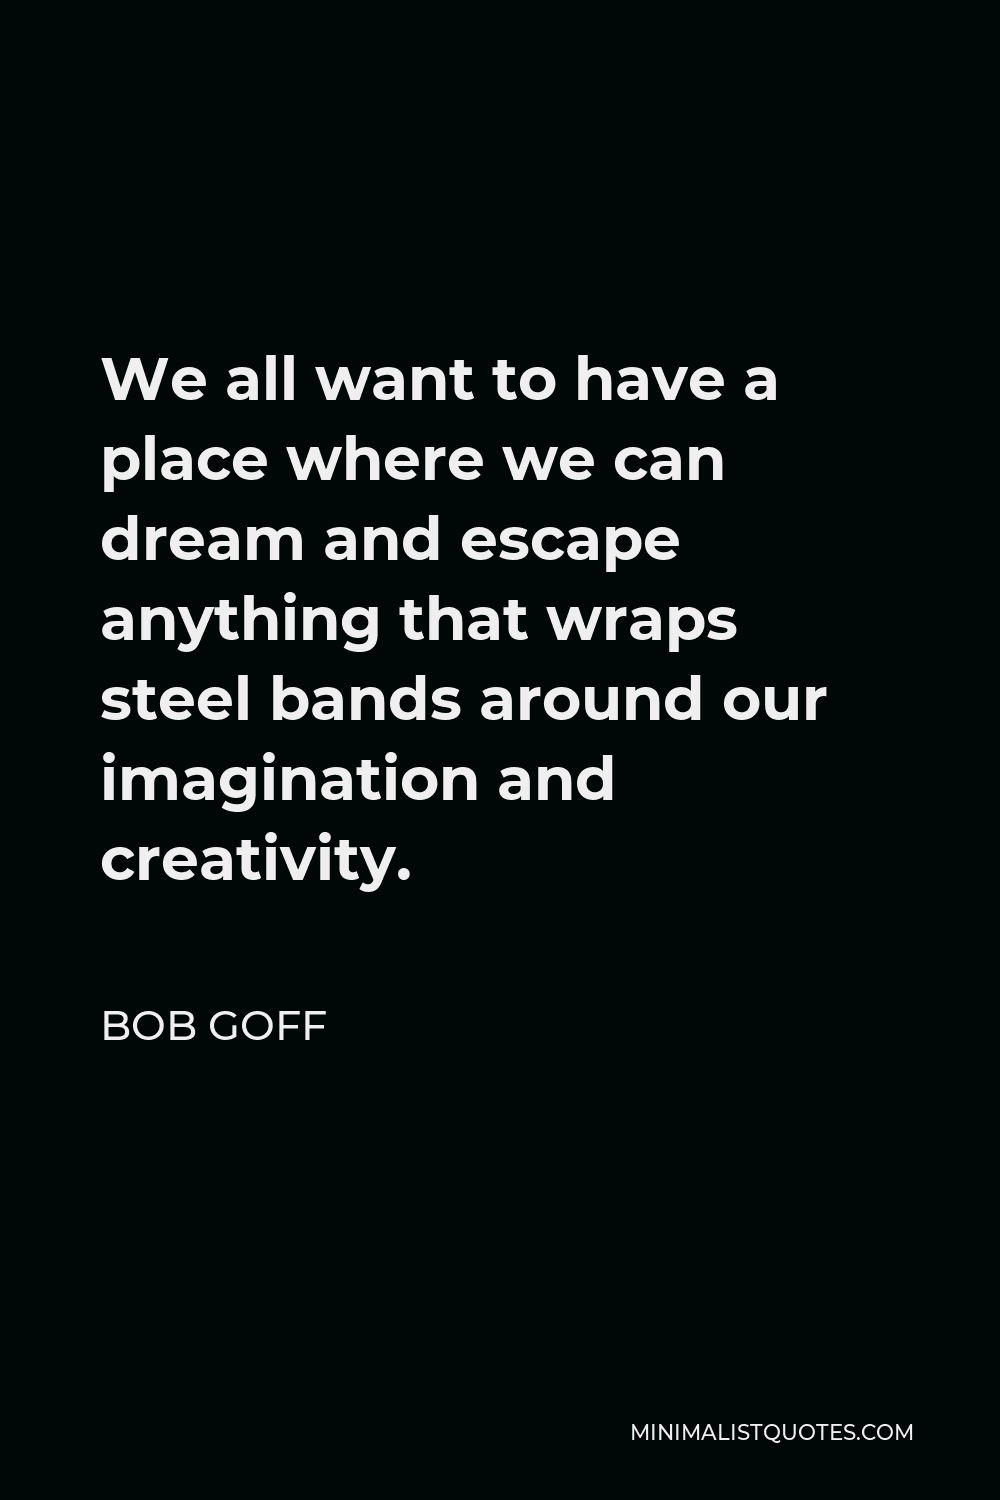 Bob Goff Quote - We all want to have a place where we can dream and escape anything that wraps steel bands around our imagination and creativity.